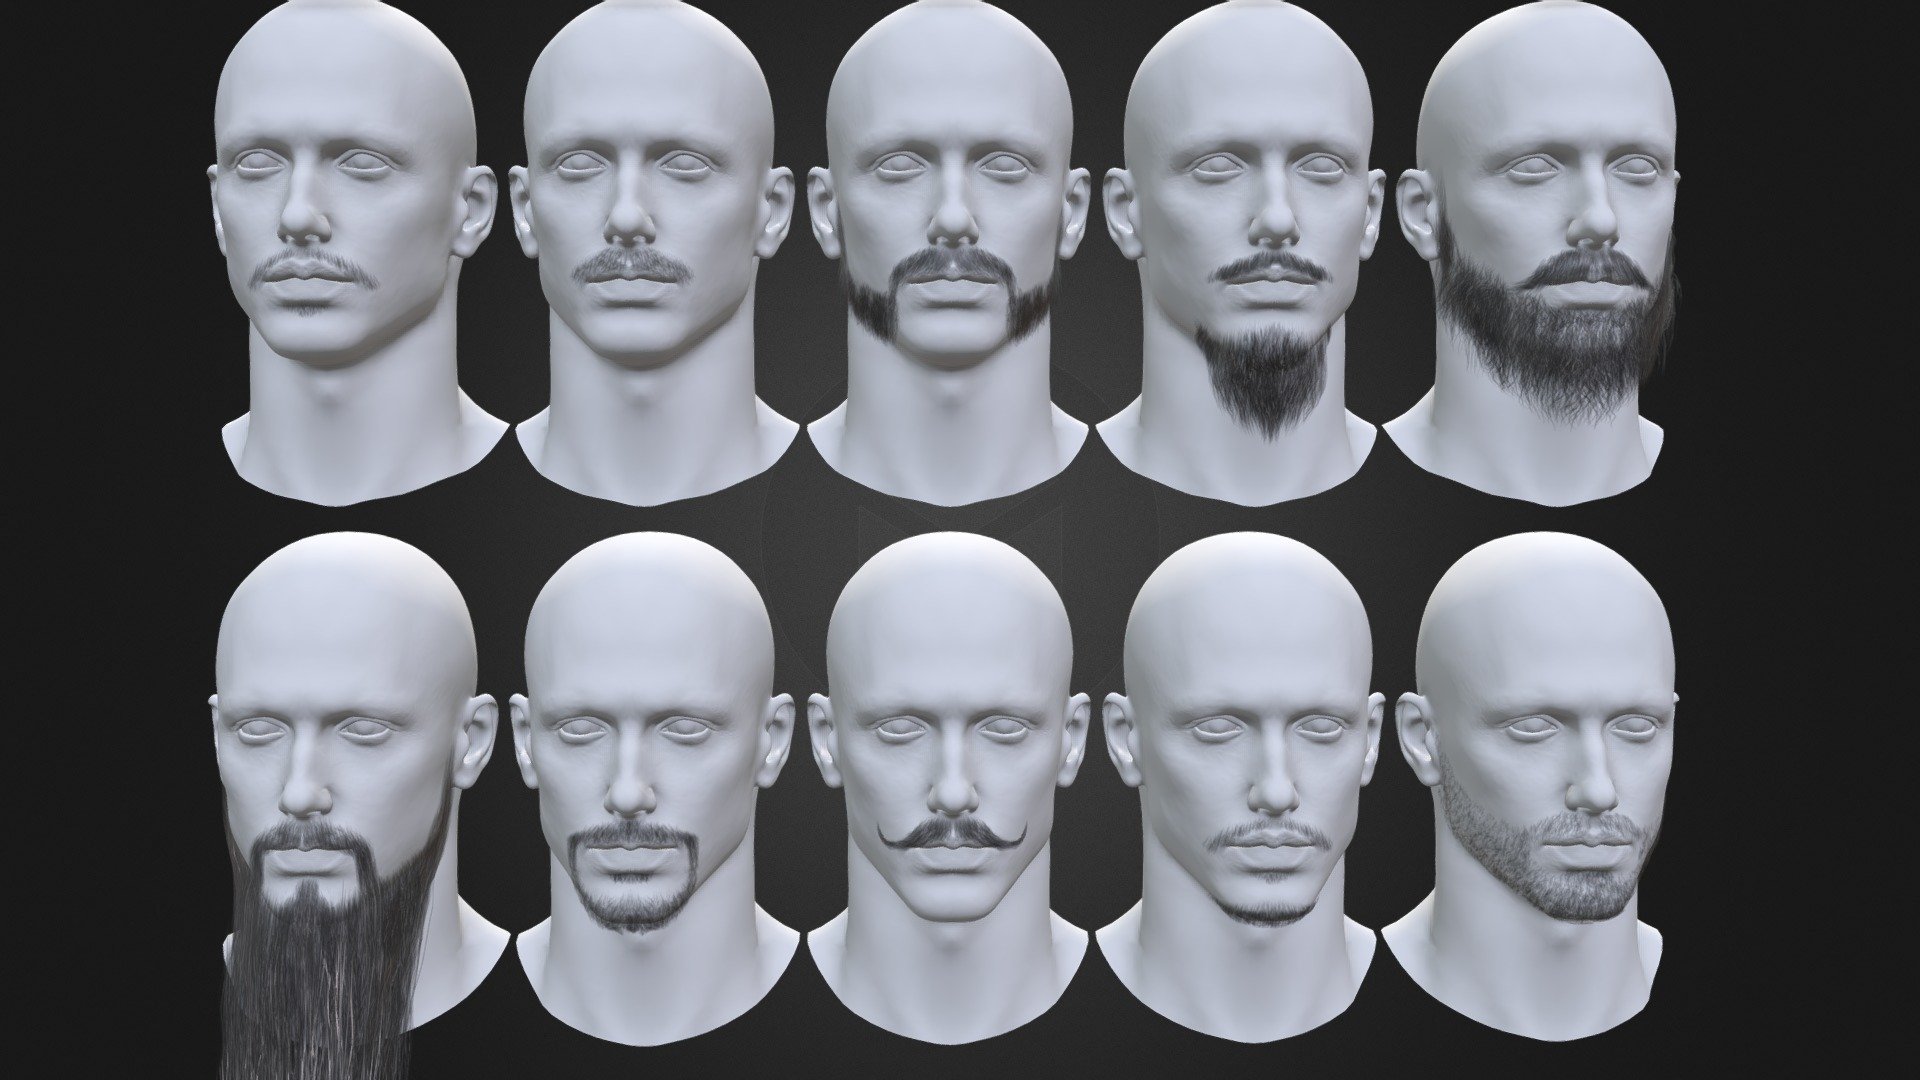 10 Real Time Hair Card Beard and Mustache for man Low-poly 3D model

All image from marmoset toolbag 4.File can be use in unity,UE,blender.

Each Beard and mustache contains the following files (formats):

obj file
fbx file
Textures(4096x4096, tga) Normal Diffuse Gloss
Marmoset file
15827 tris for all 10 beards.

Have a nice day~

Model also available in Artstation:
https://www.artstation.com/a/21699778 - 10 Real Time Hair Card Beard and Mustache pack - Buy Royalty Free 3D model by Vincent Page (@vincentpage) 3d model